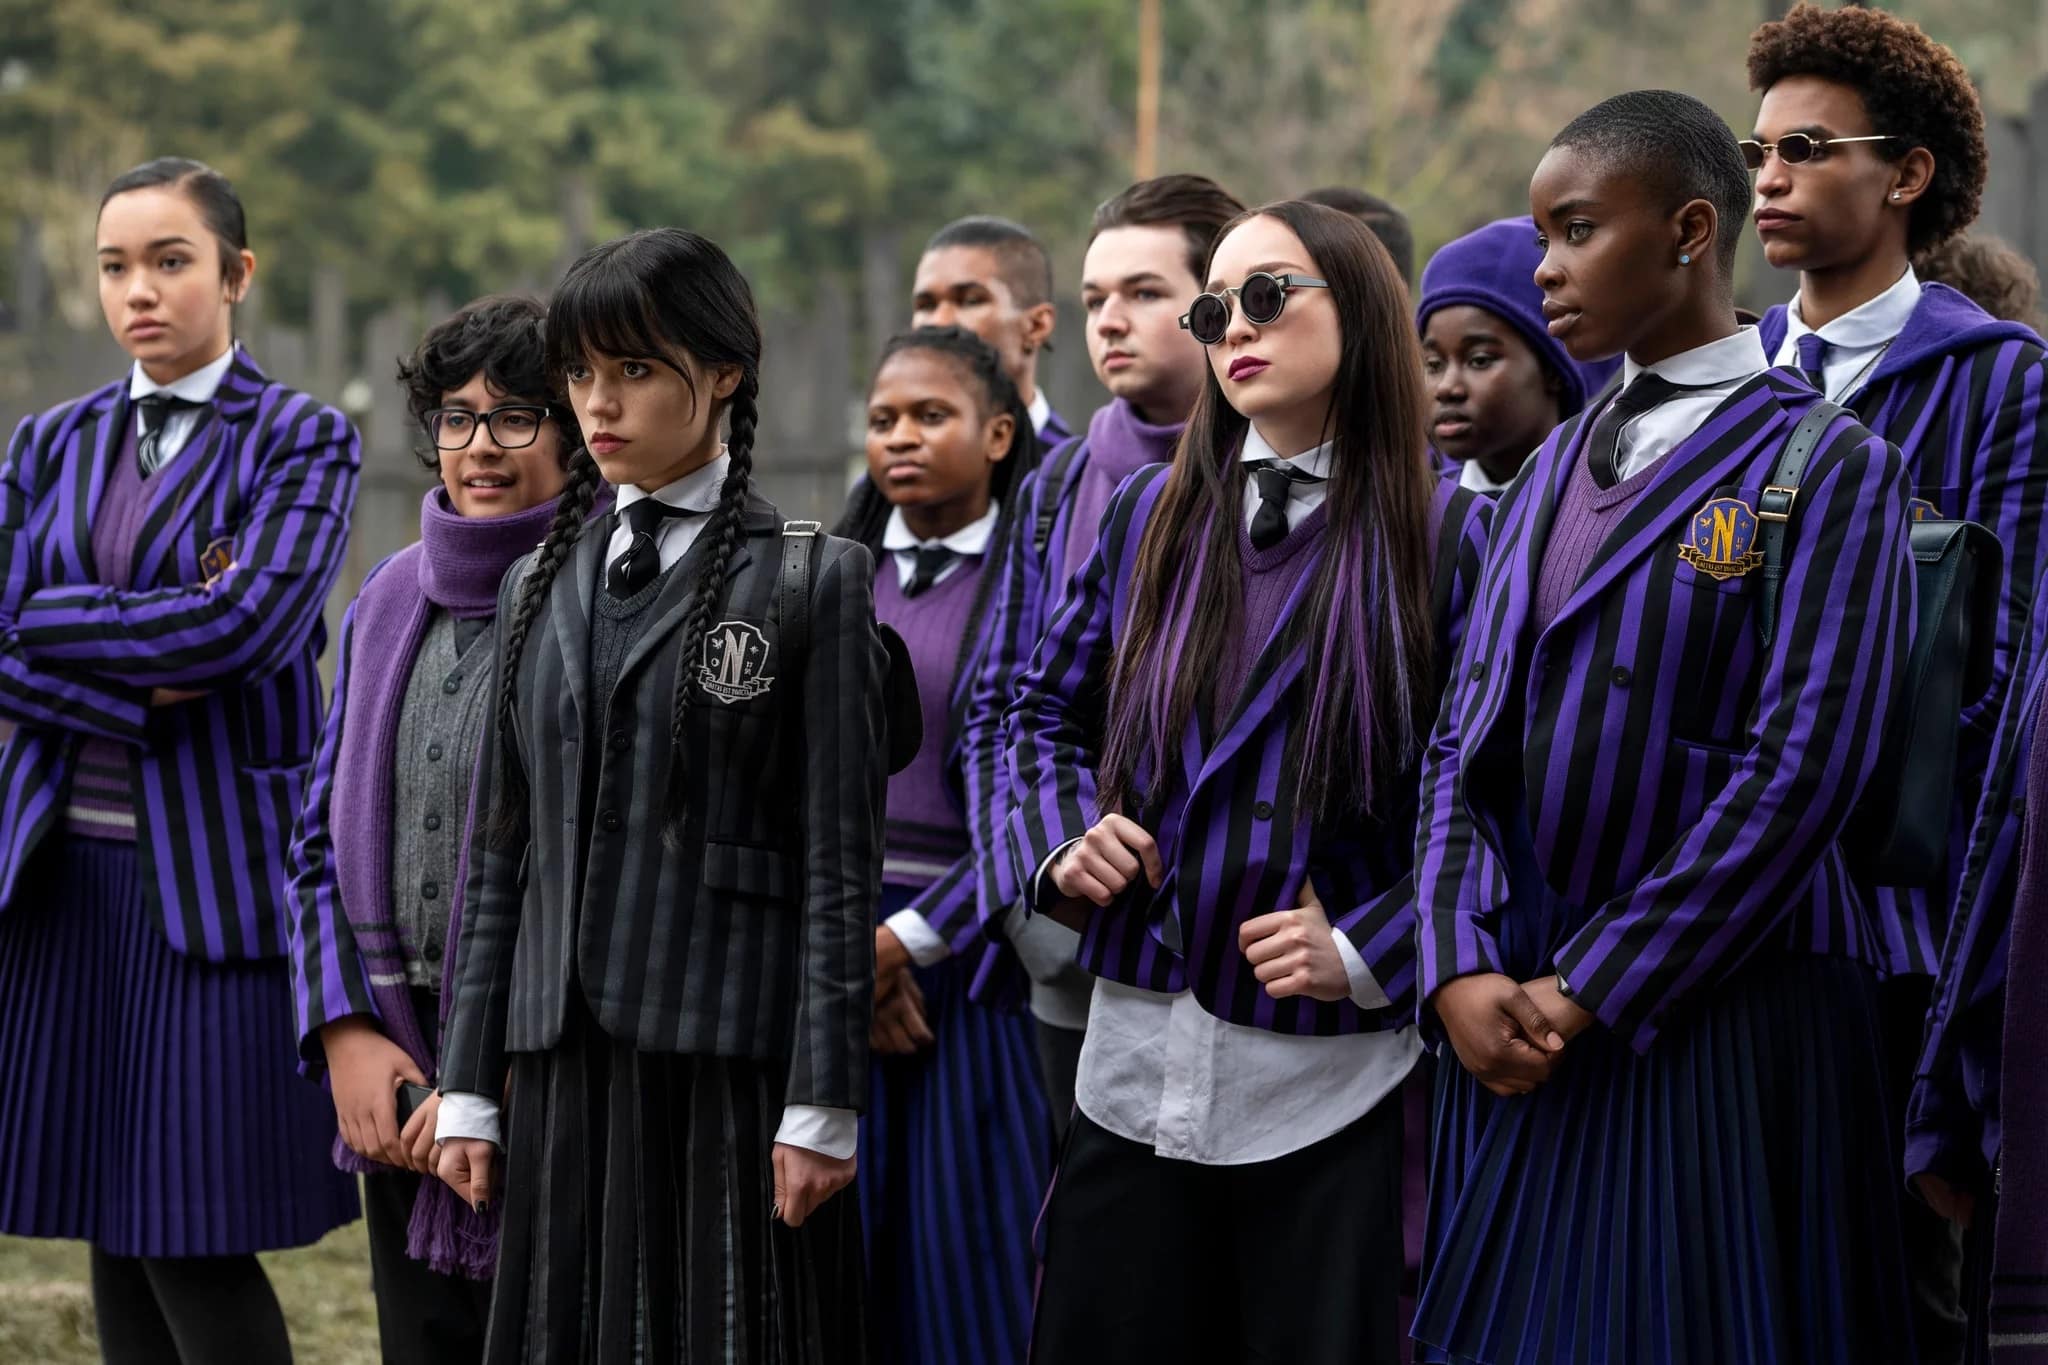 Wednesday Addams from Netflix’s hit series, Wednesday, teaches brands why individuality is important.